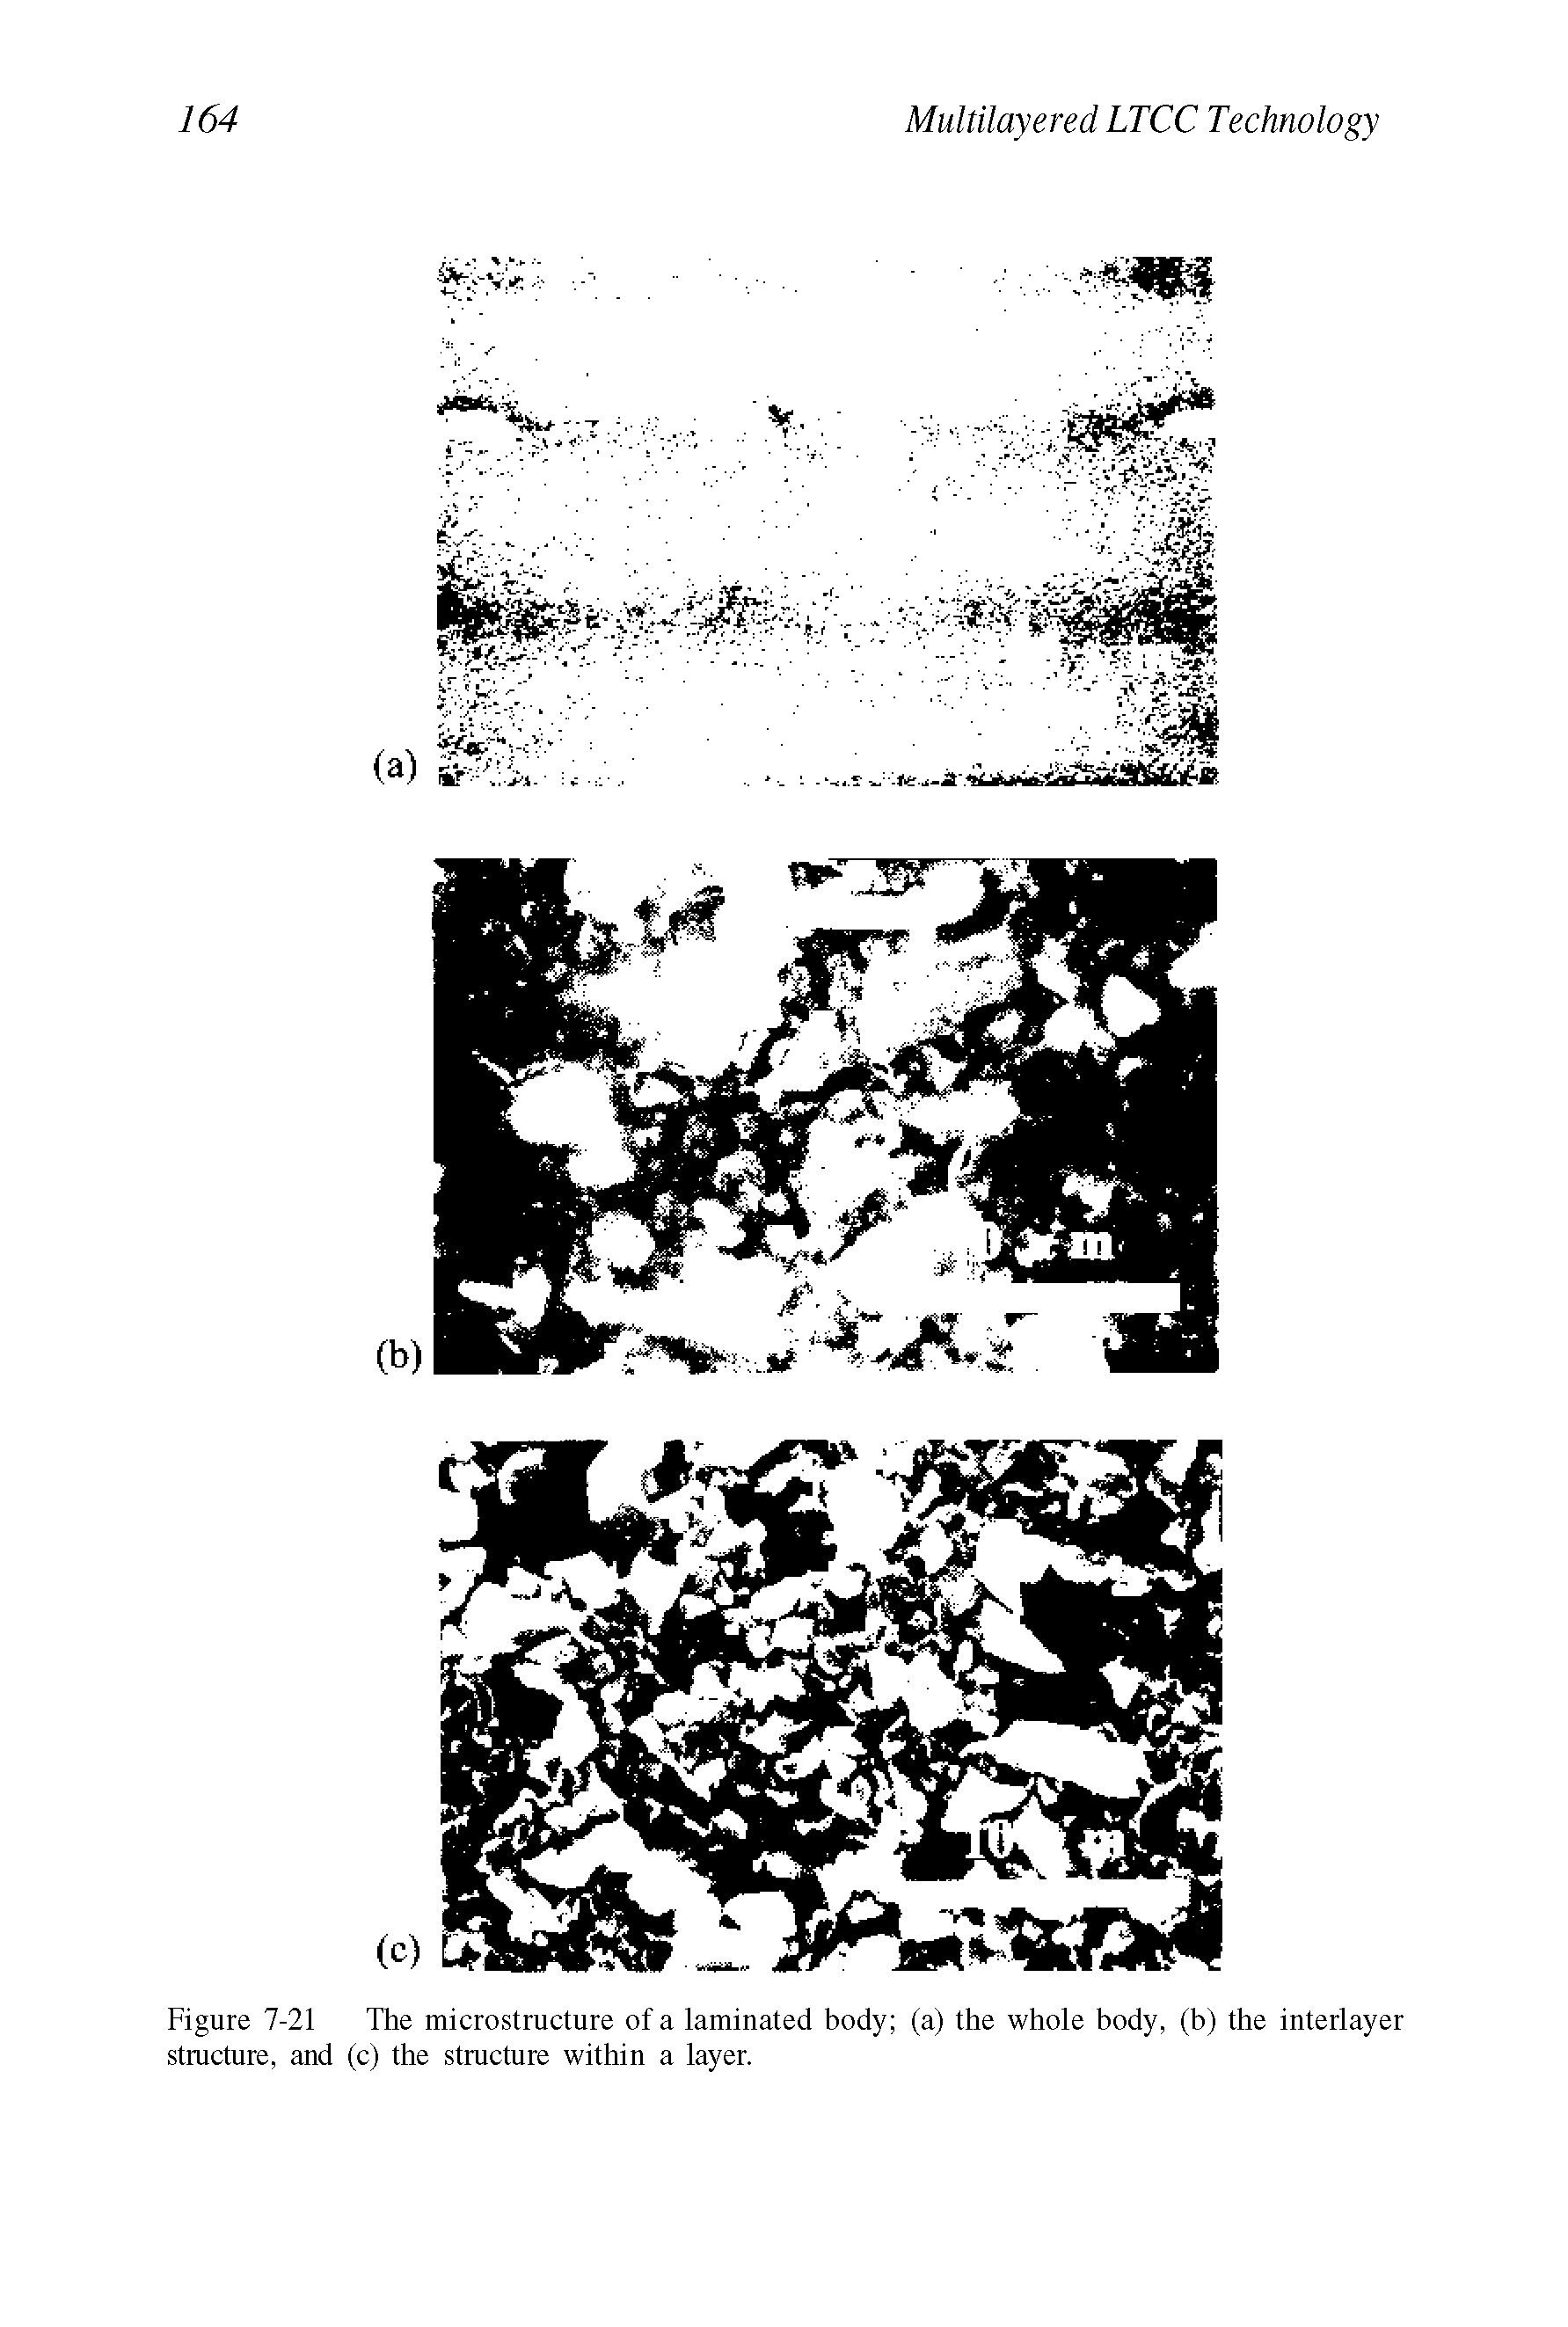 Figure 7-21 The microstructure of a laminated body (a) the whole body, (b) the interlayer stmcture, and (c) the structure within a layer.